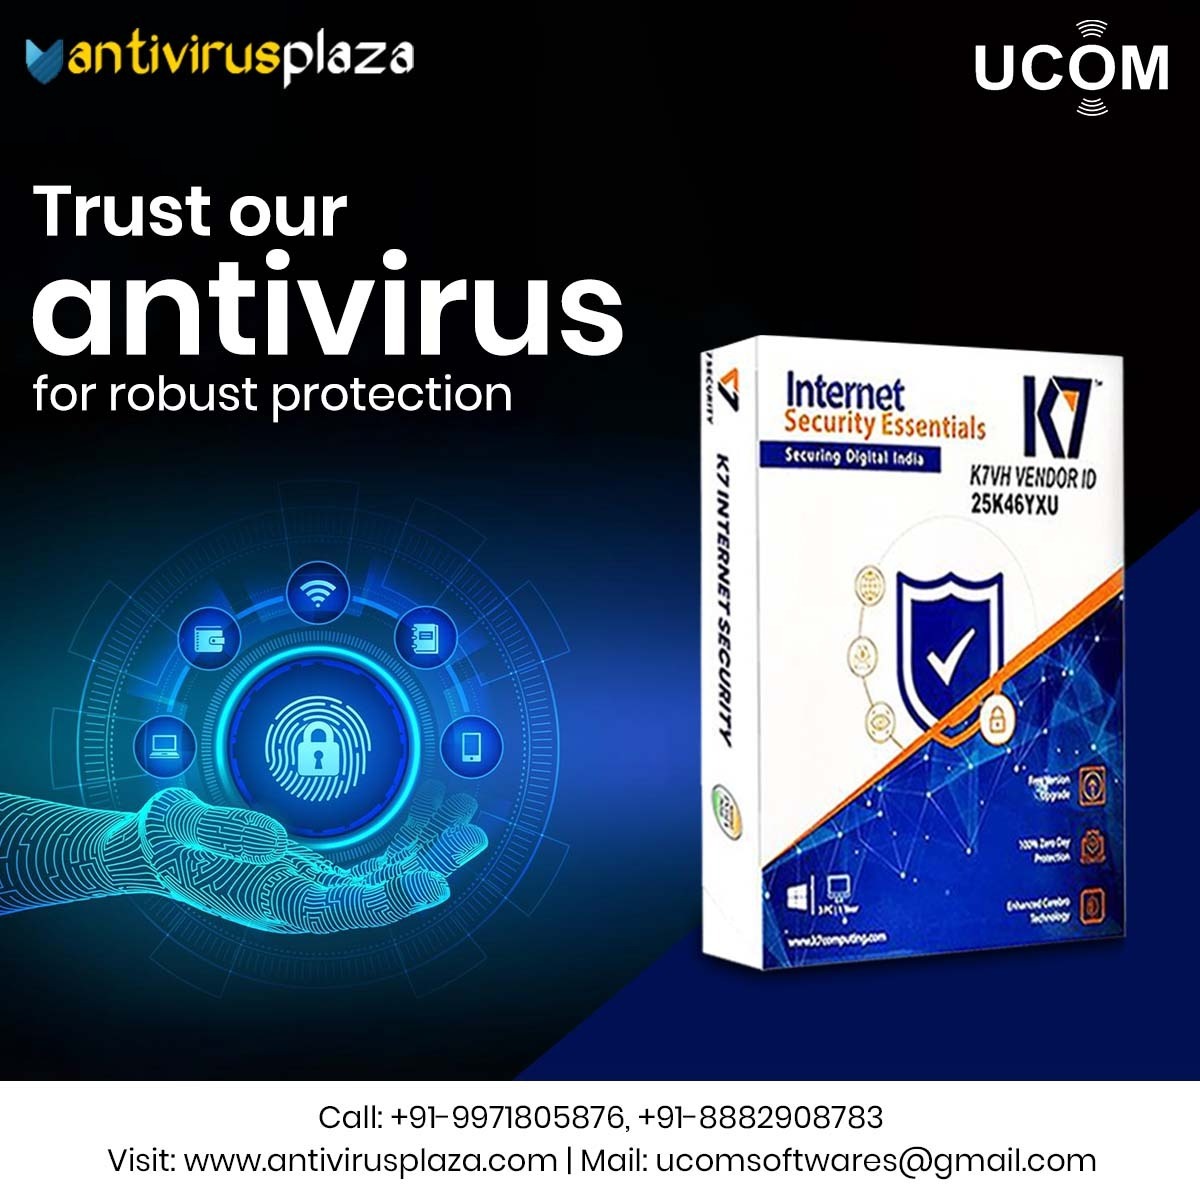 Experience unbeatable defense with our antivirus. Trust us to keep your devices fortified and your data safe from all angles. 

𝐂𝐚𝐥𝐥: +91-99718 05876
𝐕𝐢𝐬𝐢𝐭 𝐔𝐬: antivirusplaza.com

#StaySecure #K7Antivirus #AntivirusPlaza #InternetSecurity #MobileSecurity